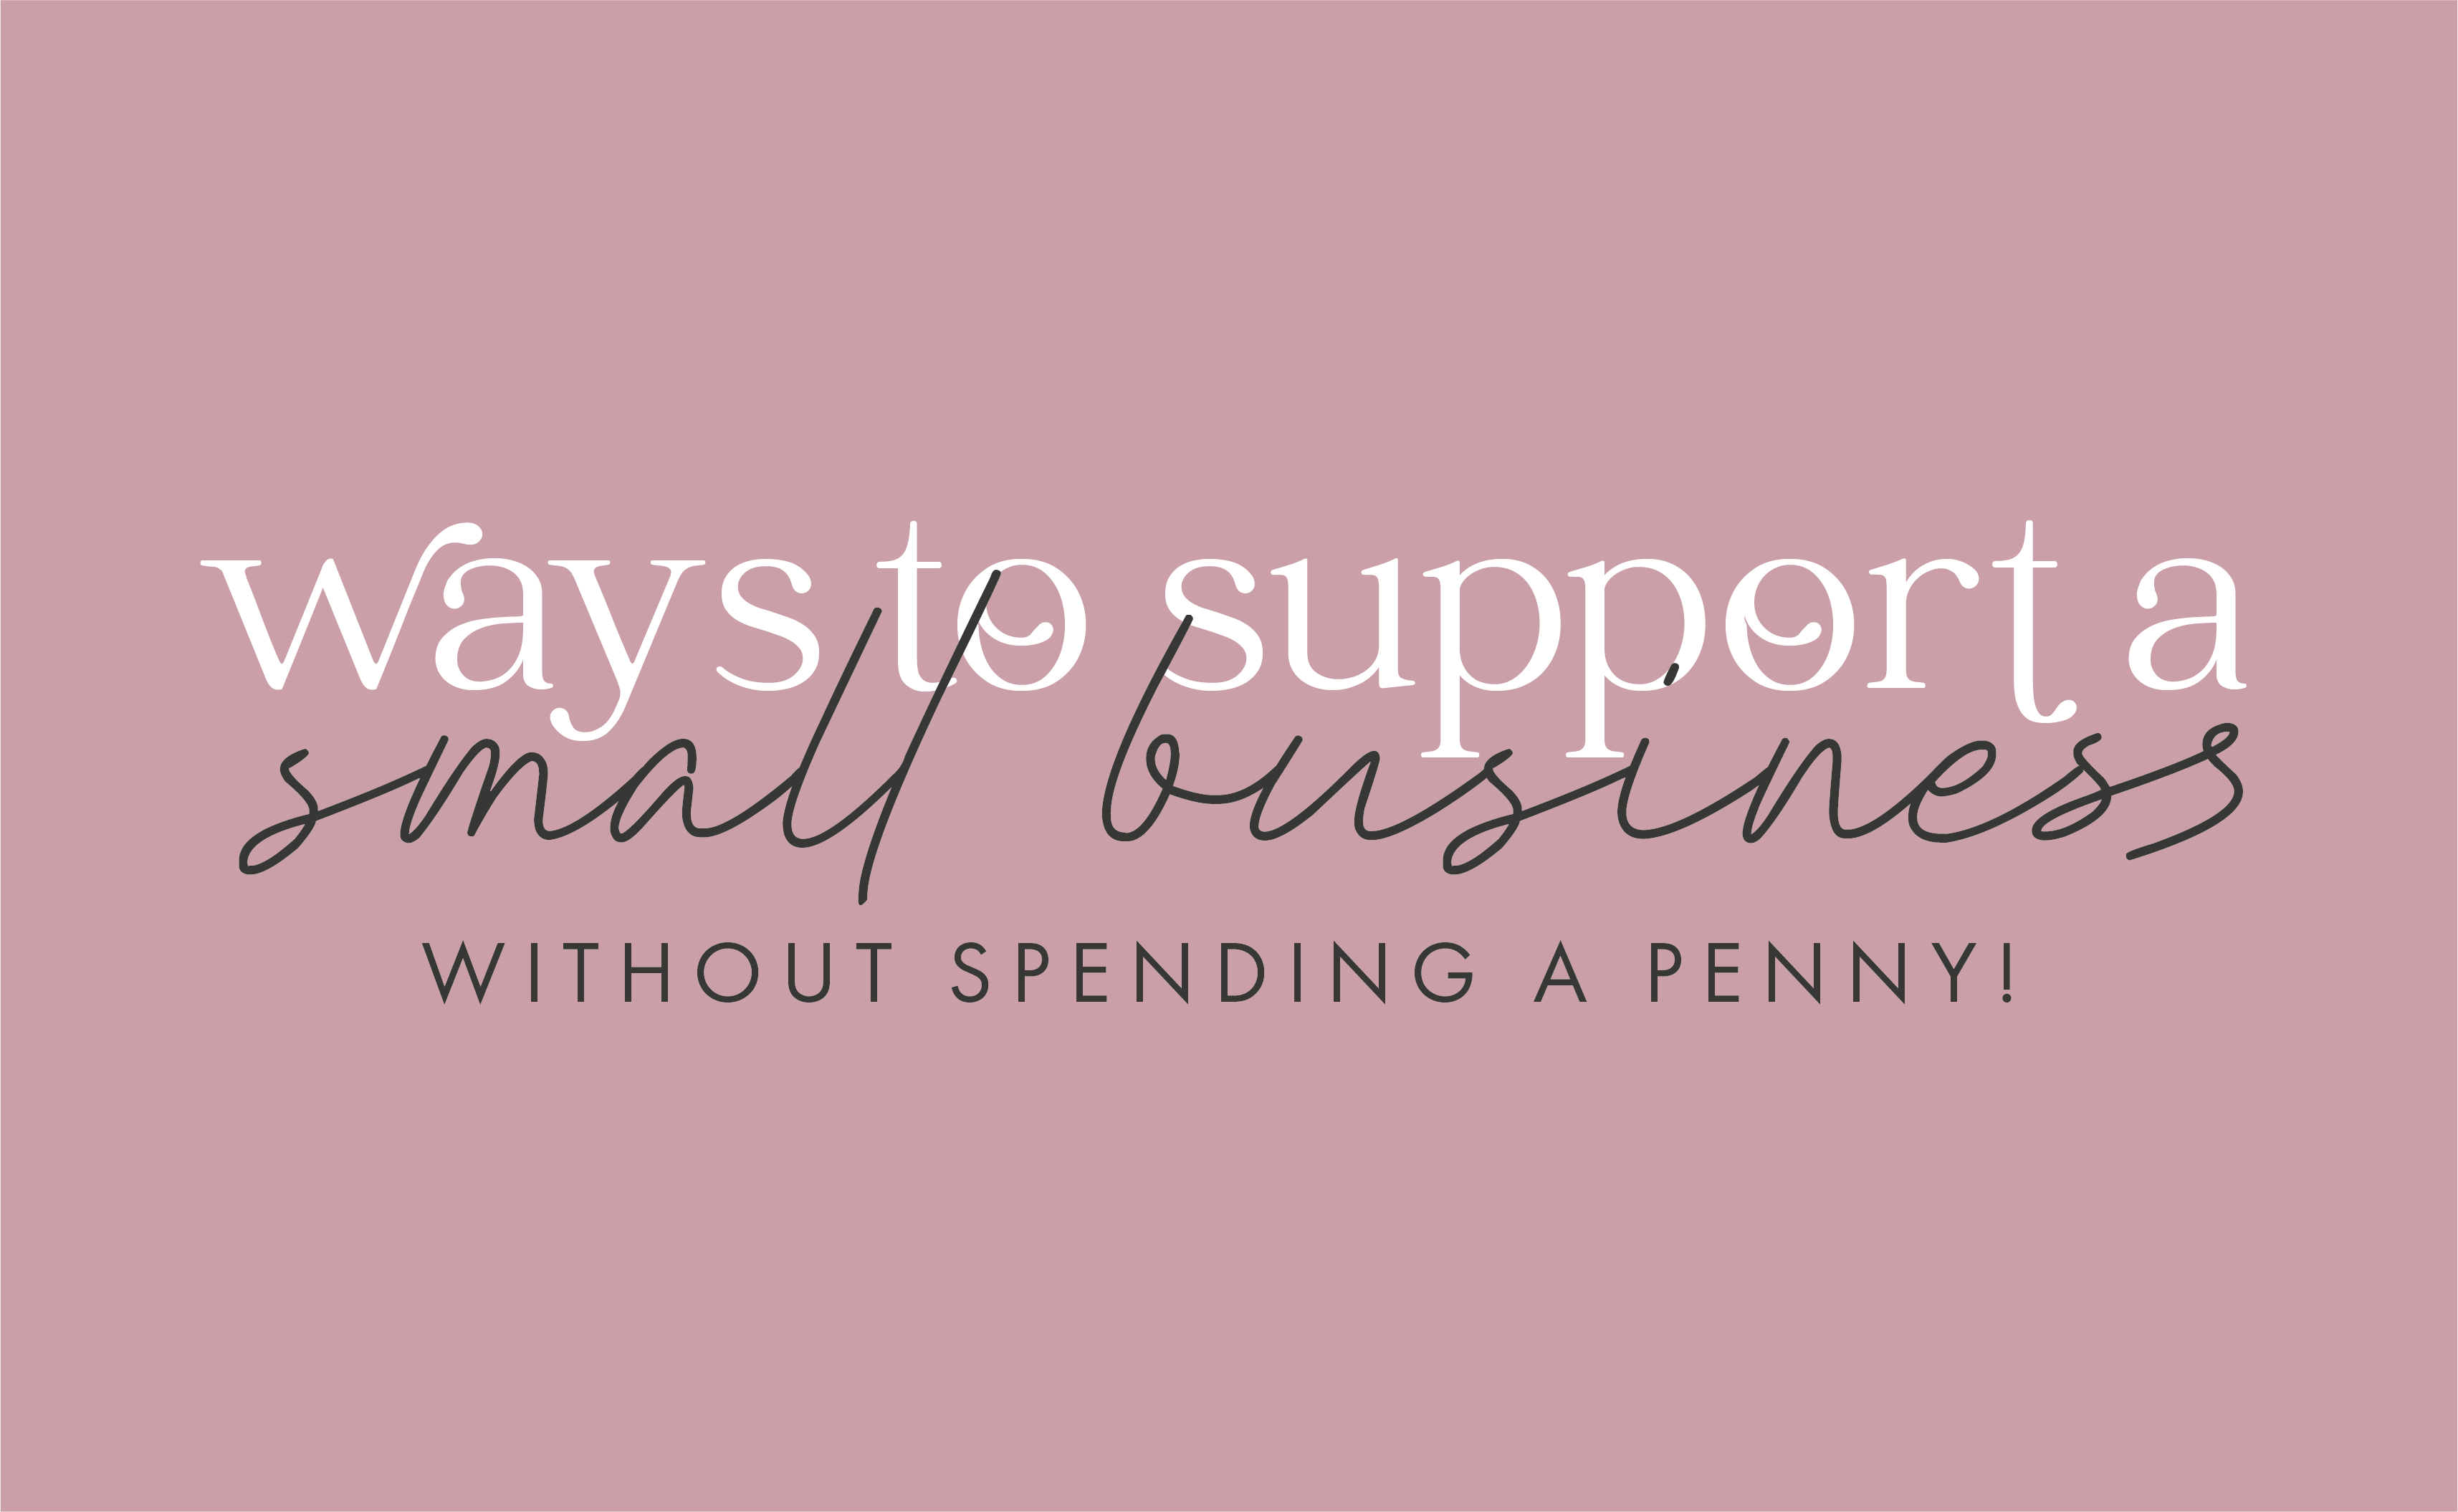 How to support small businesses for free